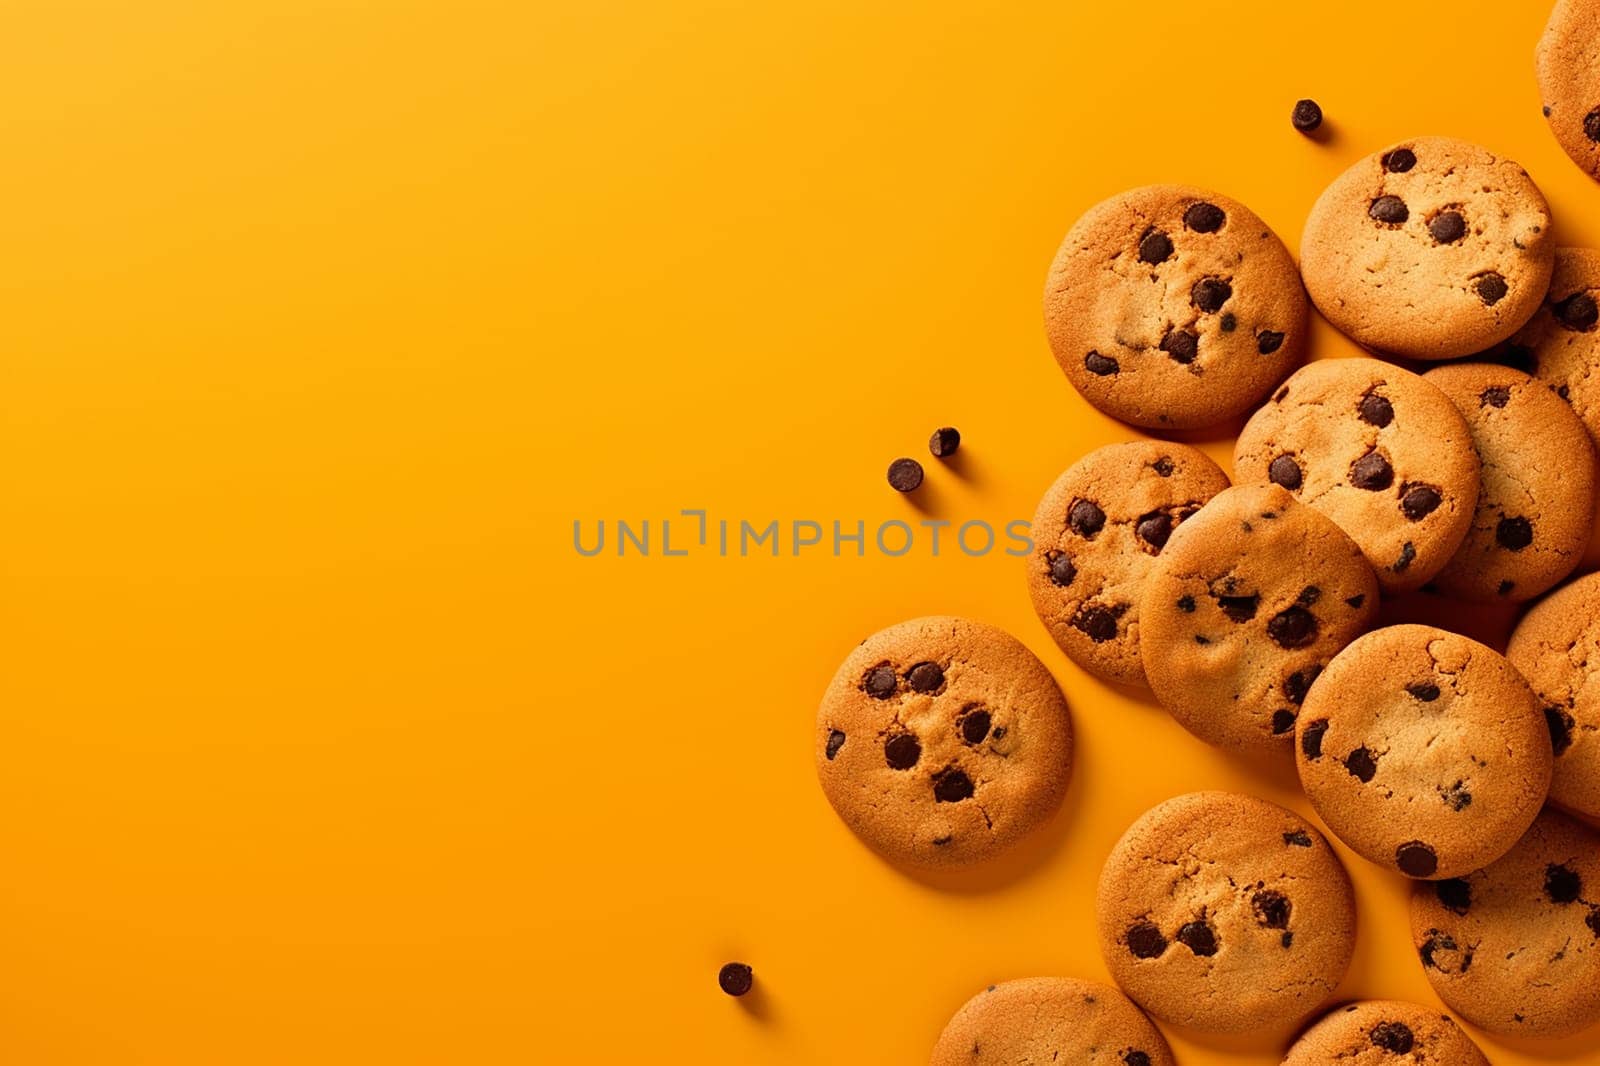 Chocolate chip cookies scattered with chocolate morsels on dark background by Hype2art